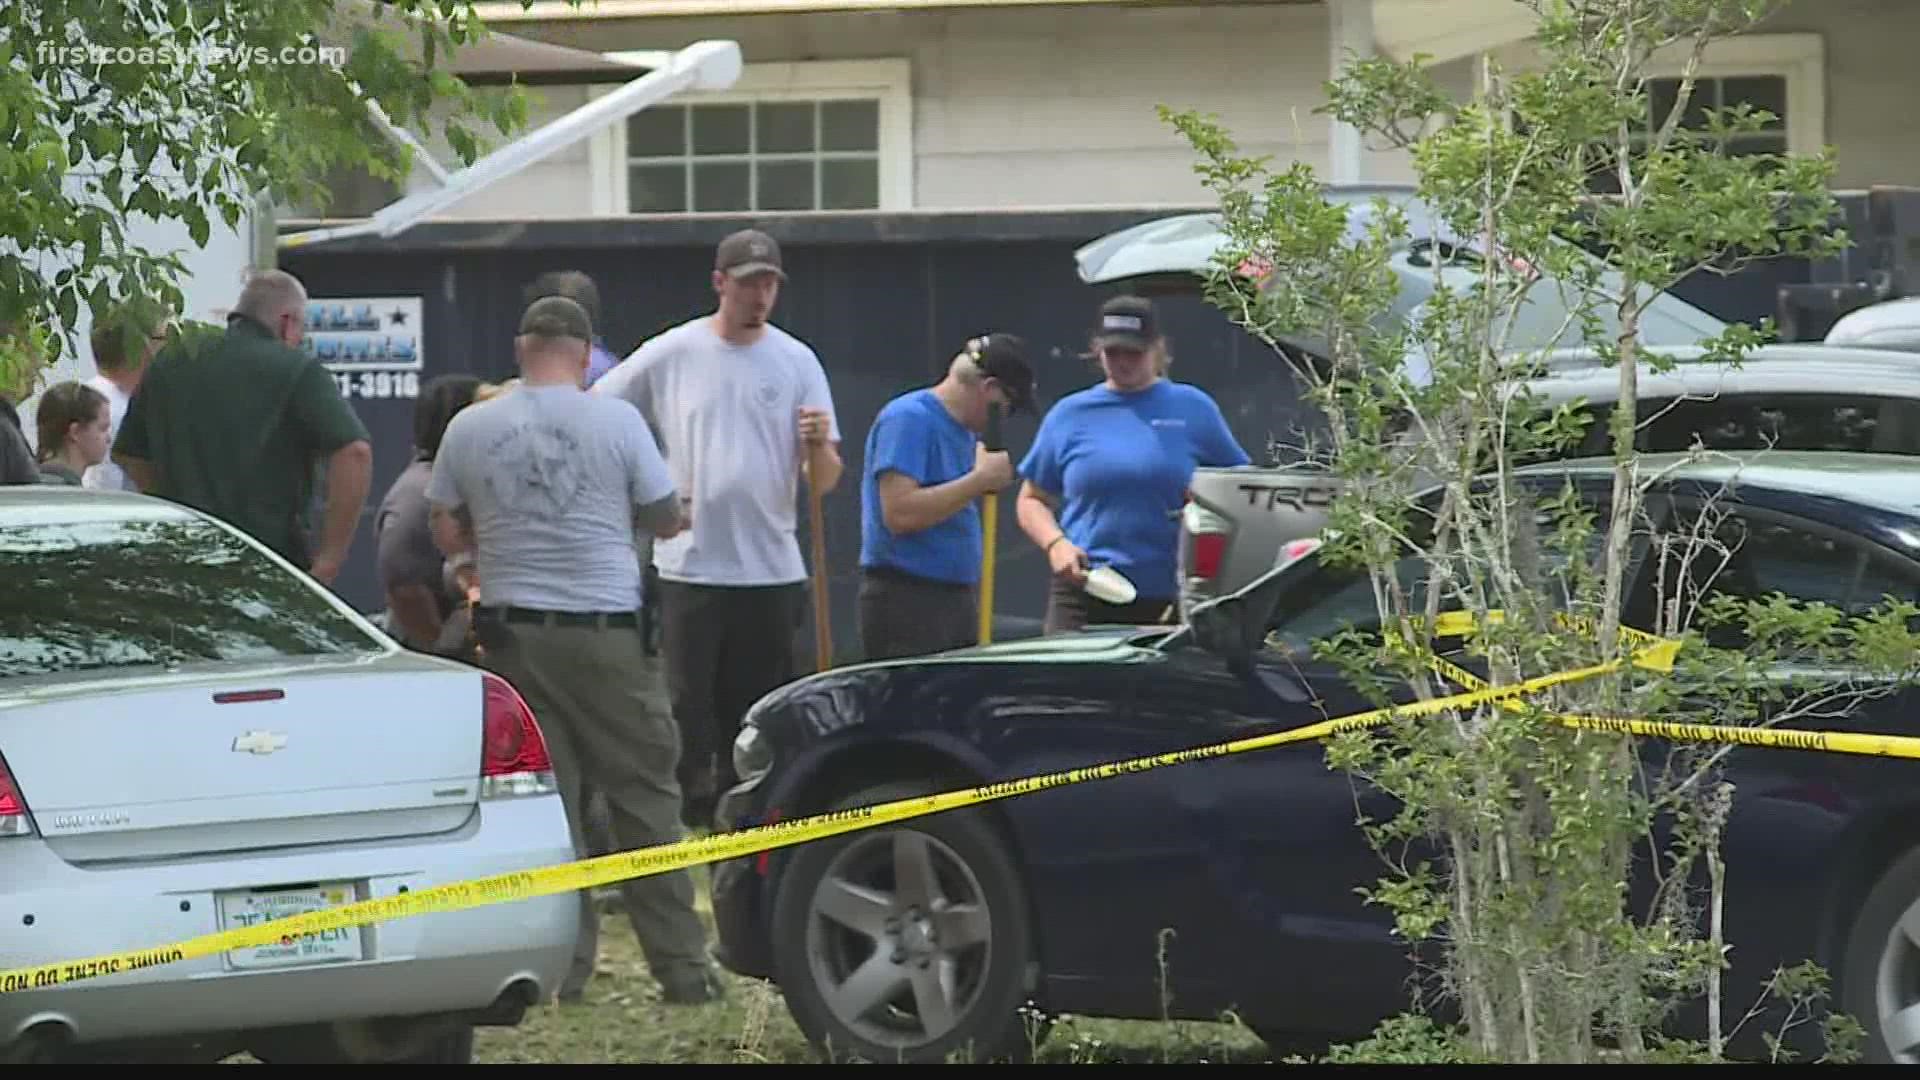 The man investigators say held two people captive in Green Cove Springs earlier this week confessed to murder, according to an arrest report obtained by First Coast